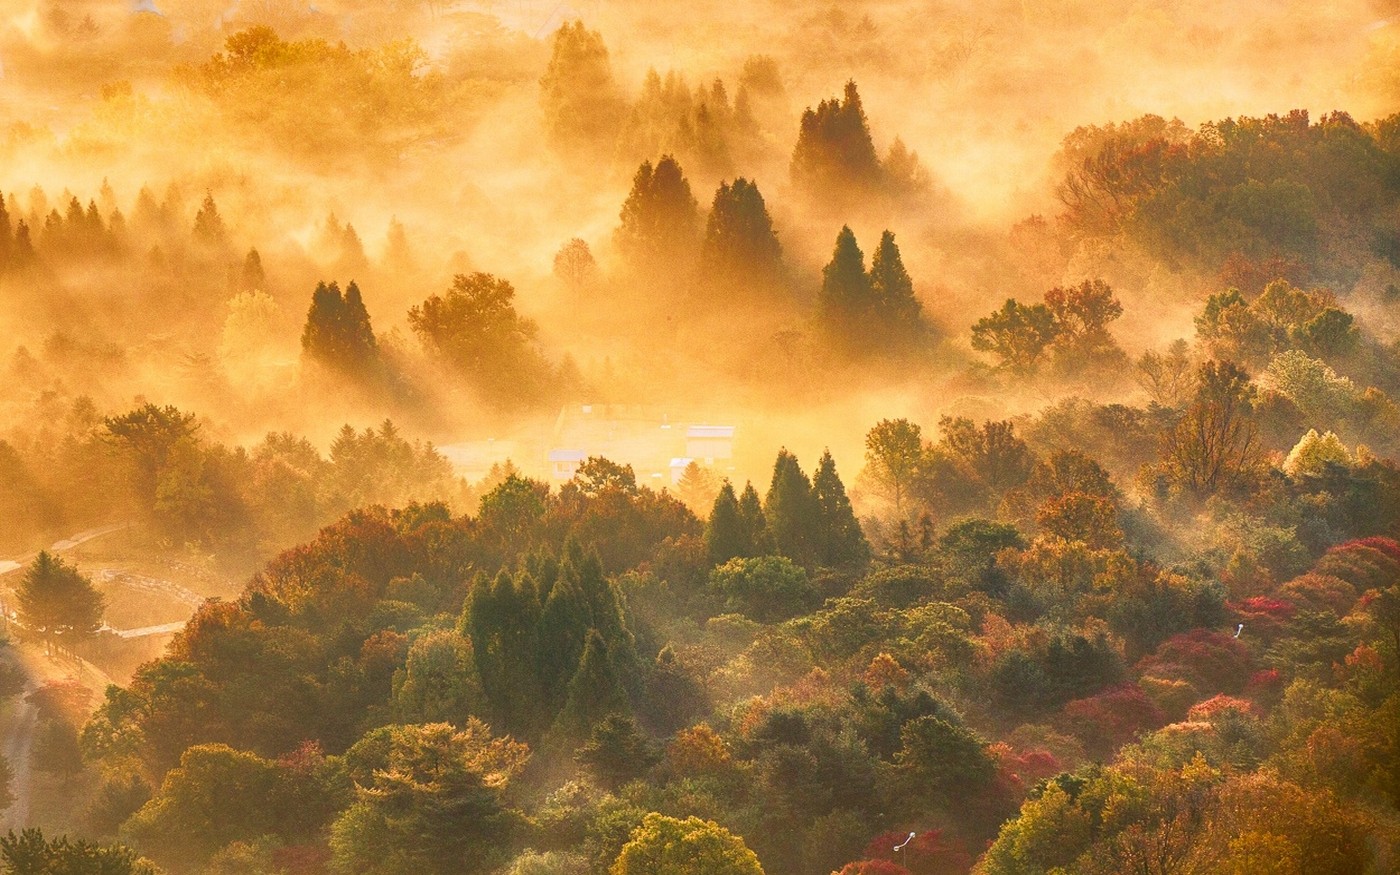 General 1400x875 nature landscape fall forest mist trees sun rays colorful orange